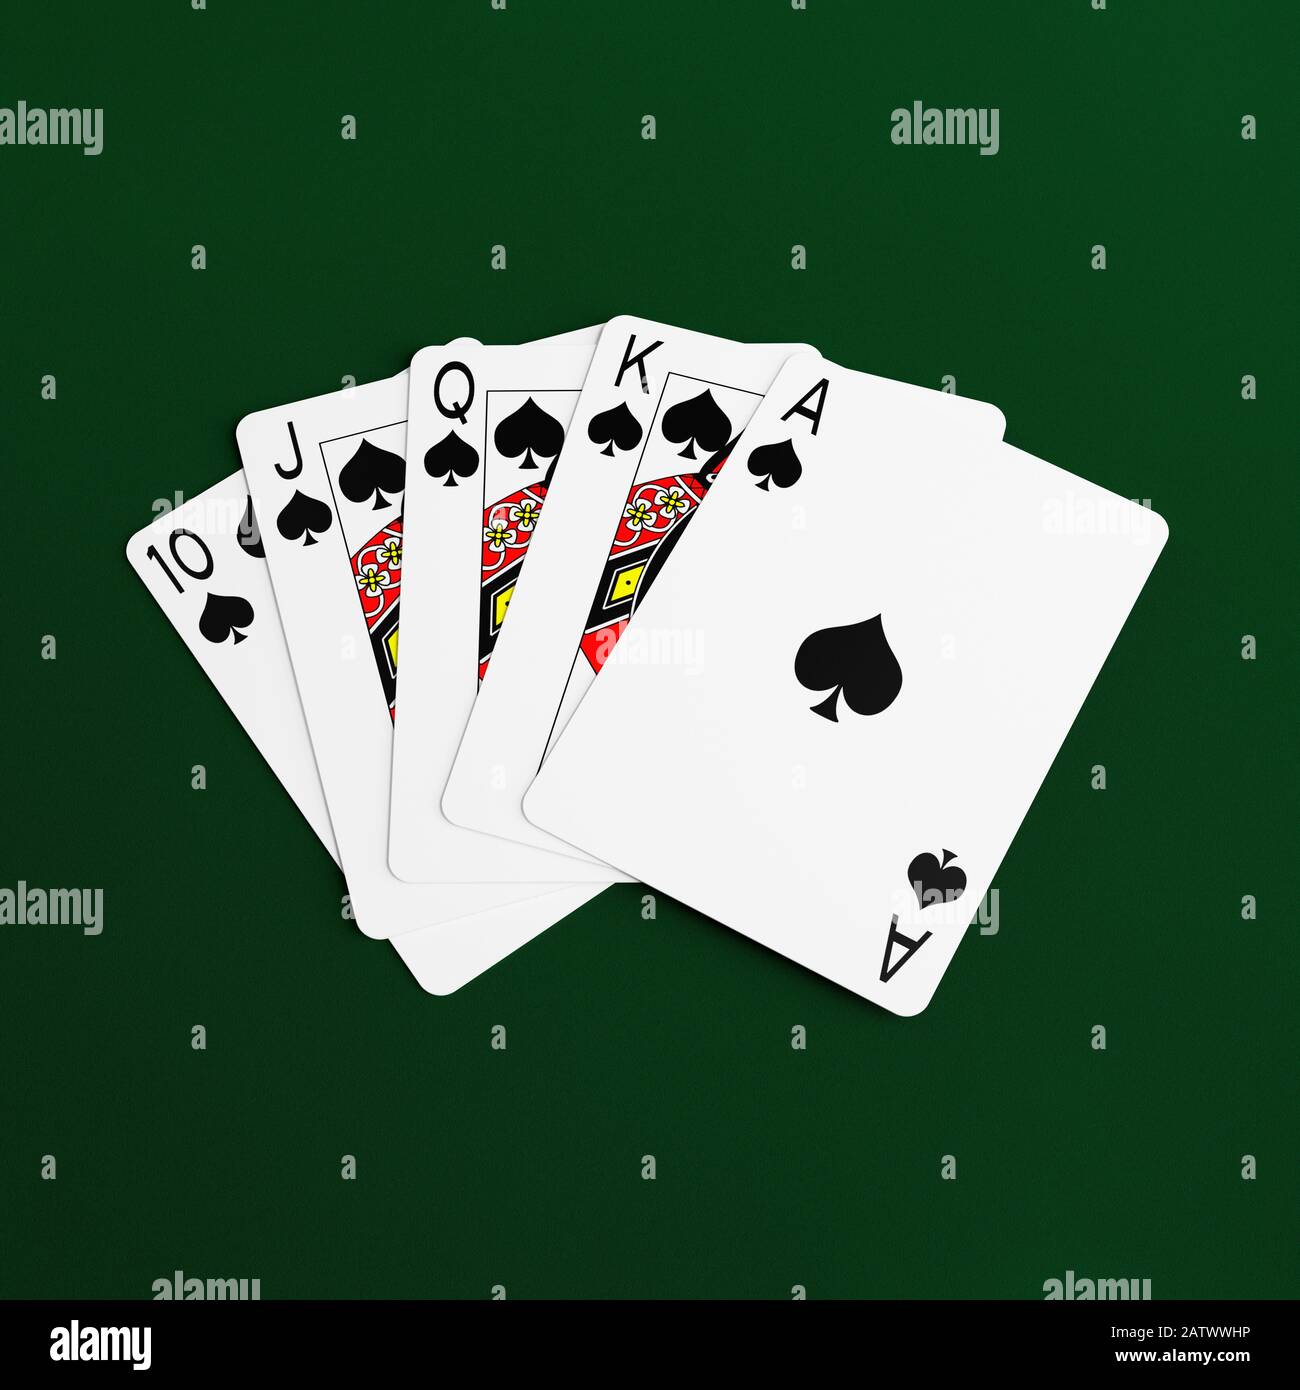 Royal Flush poker hand of playing cards on a green baize background Stock Photo